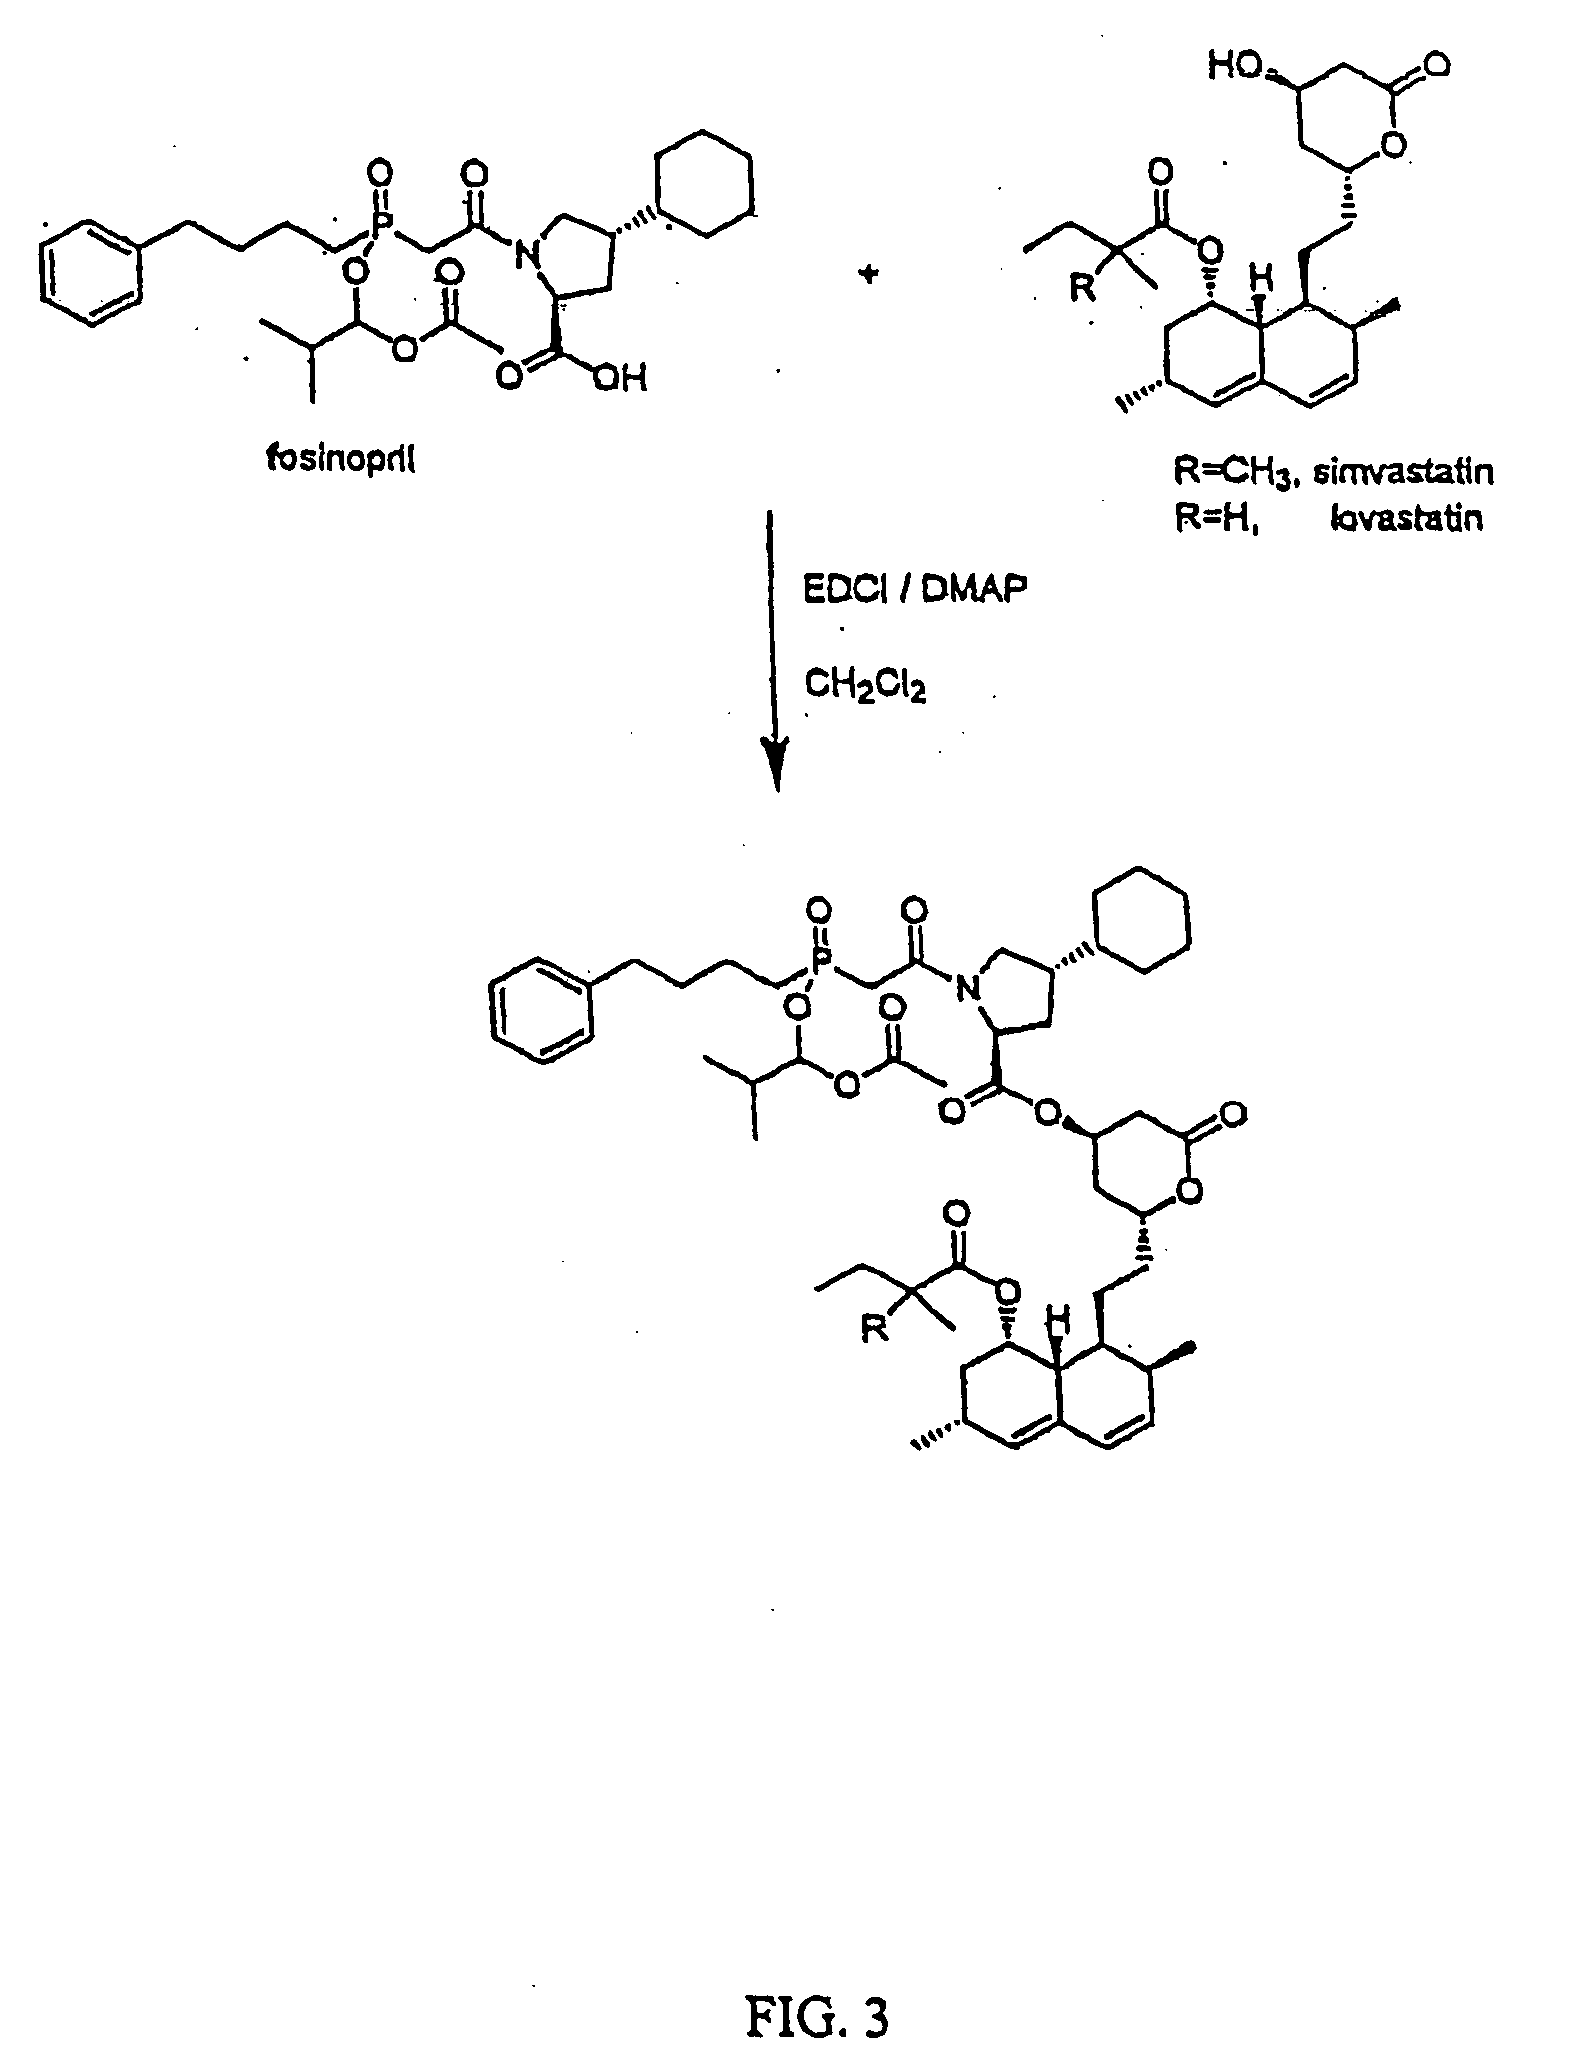 HMGCoA reductase inhibitor-angiotensin converting enzyme inhibitor compounds